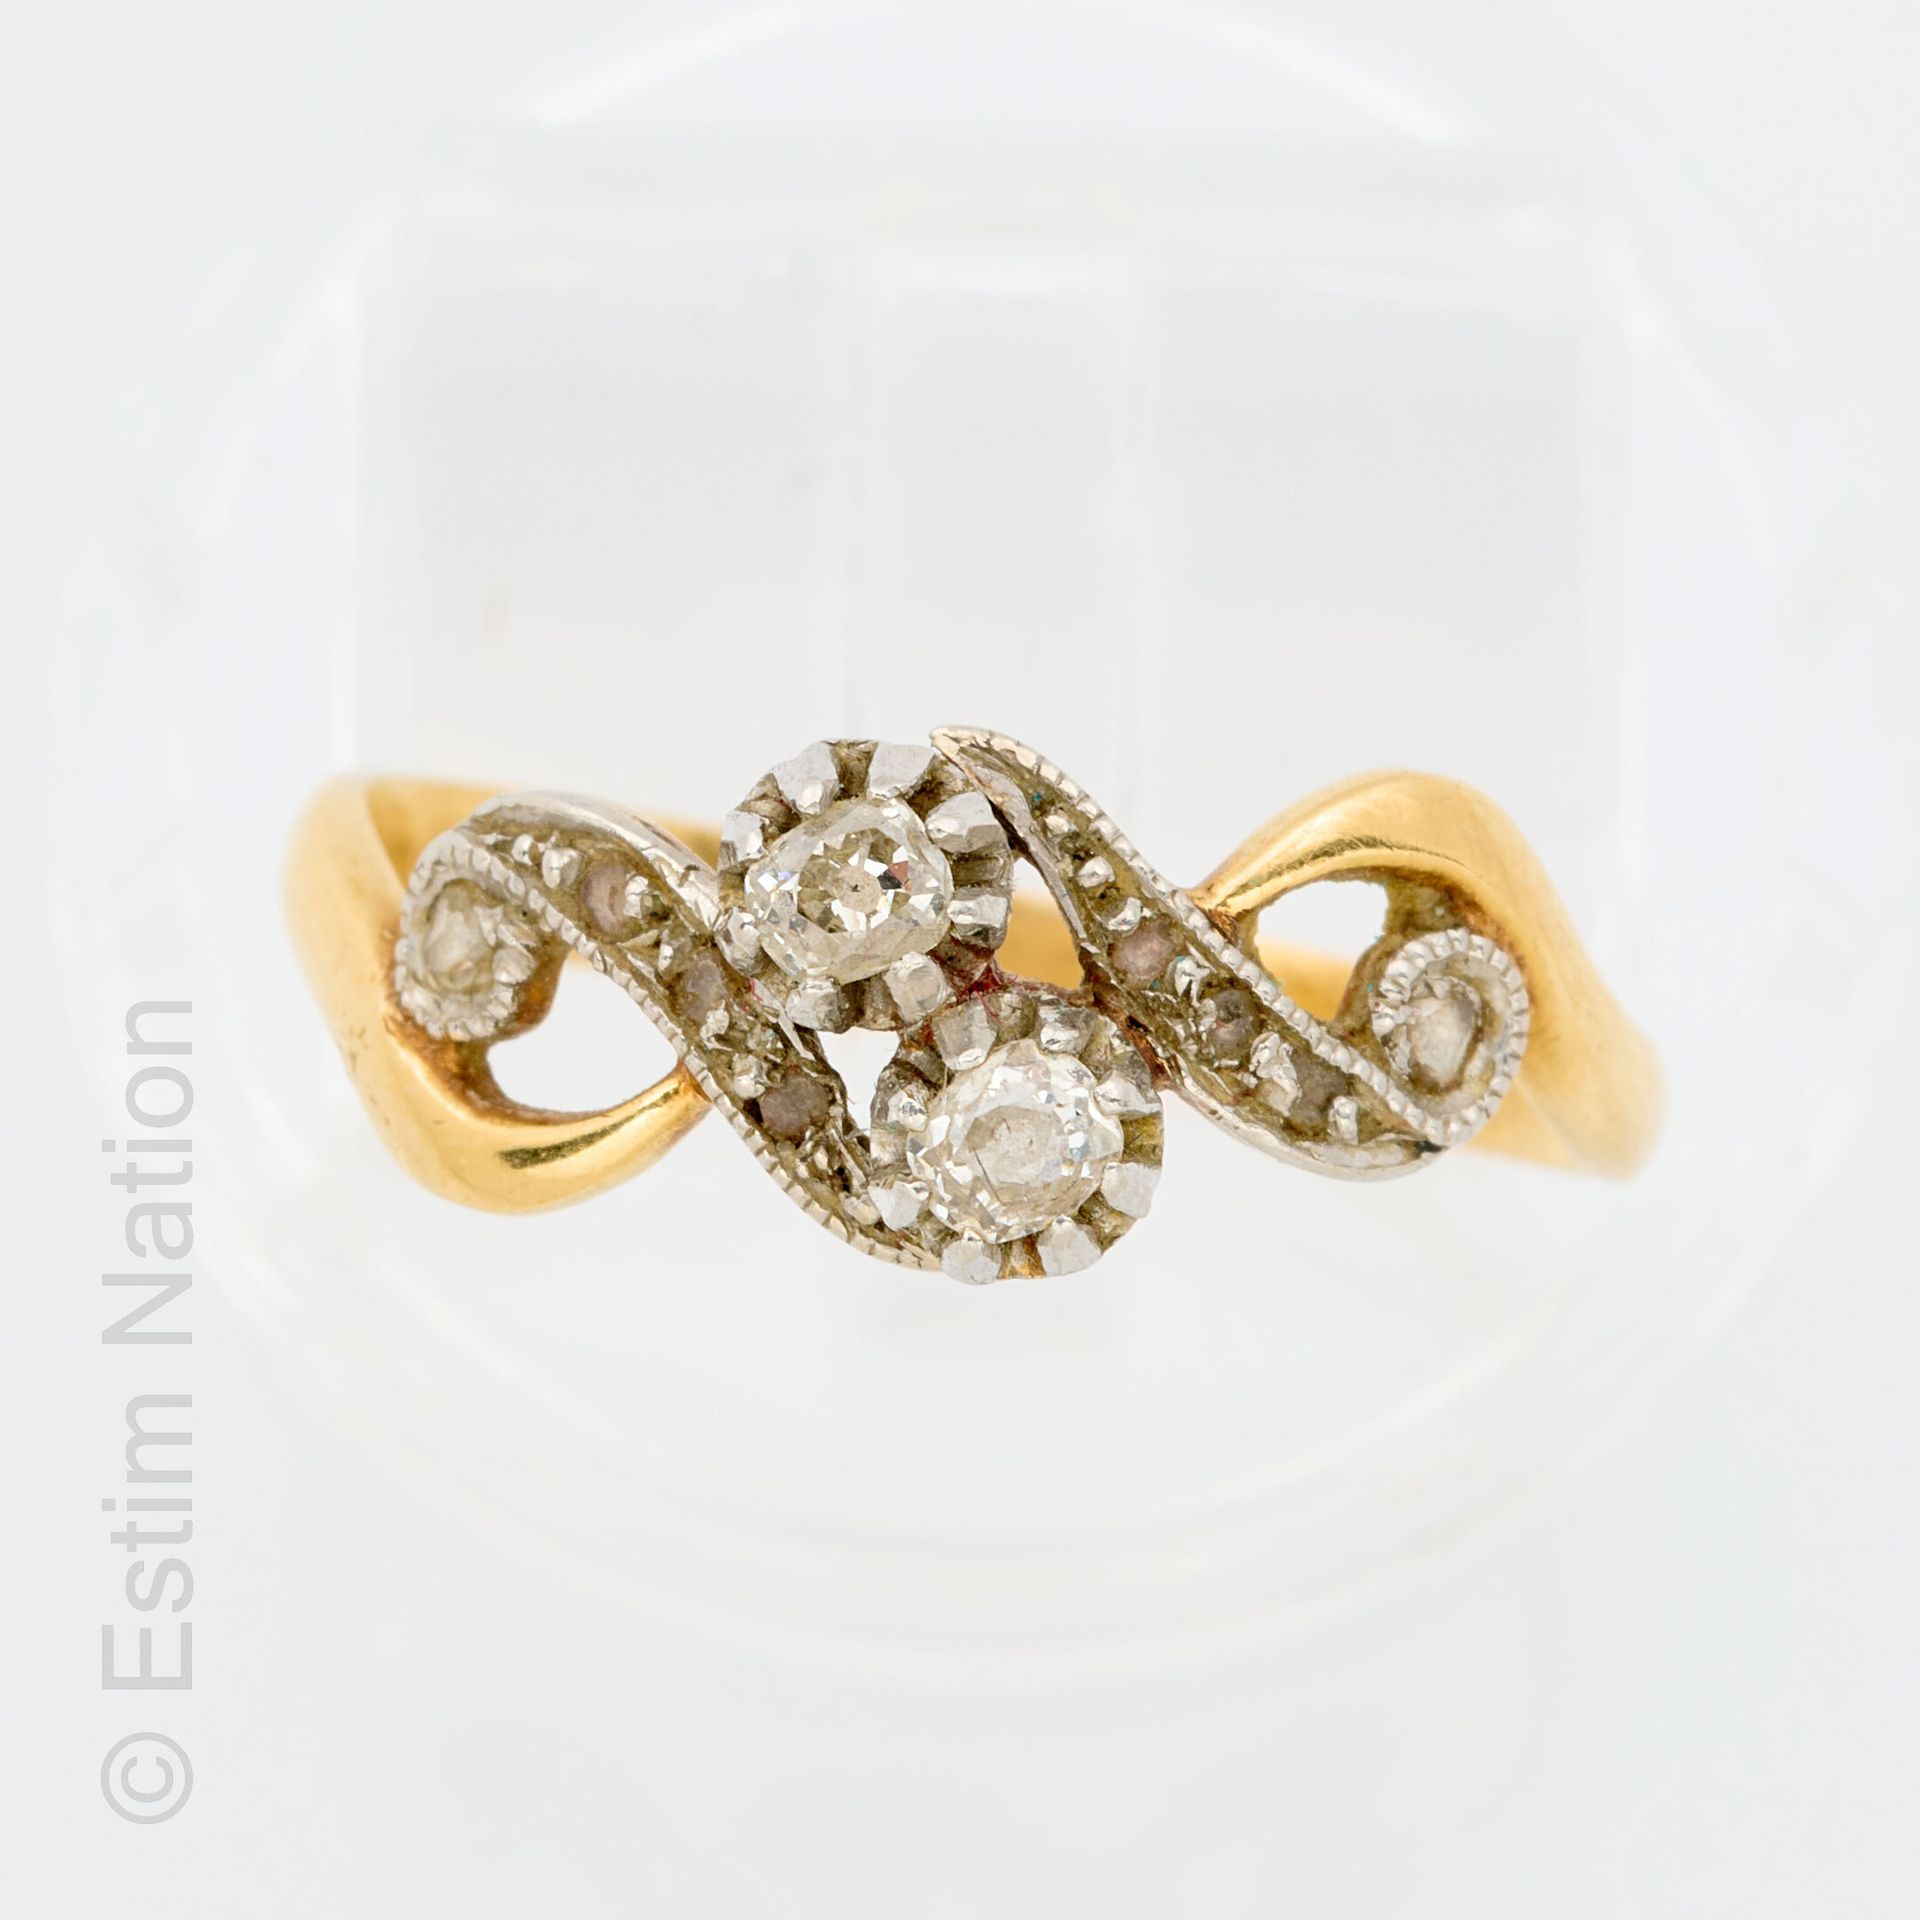 BAGUE TOI ET MOI OR ET DIAMANTS Ring "You and Me" in yellow gold and white gold &hellip;